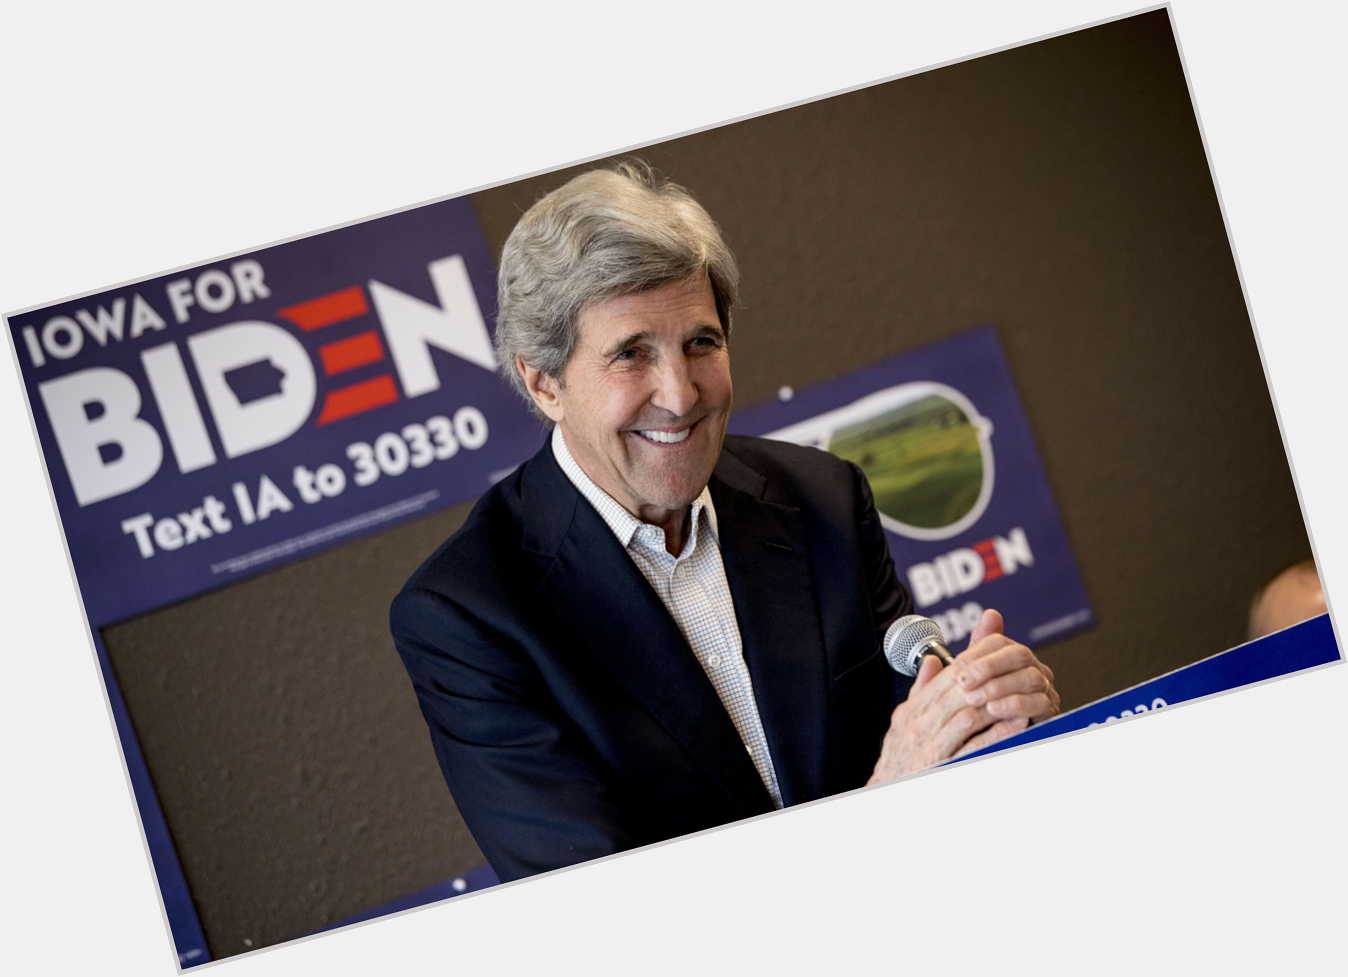 Happy Birthday to incoming Special Presidential Envoy for Climate, John Kerry!  